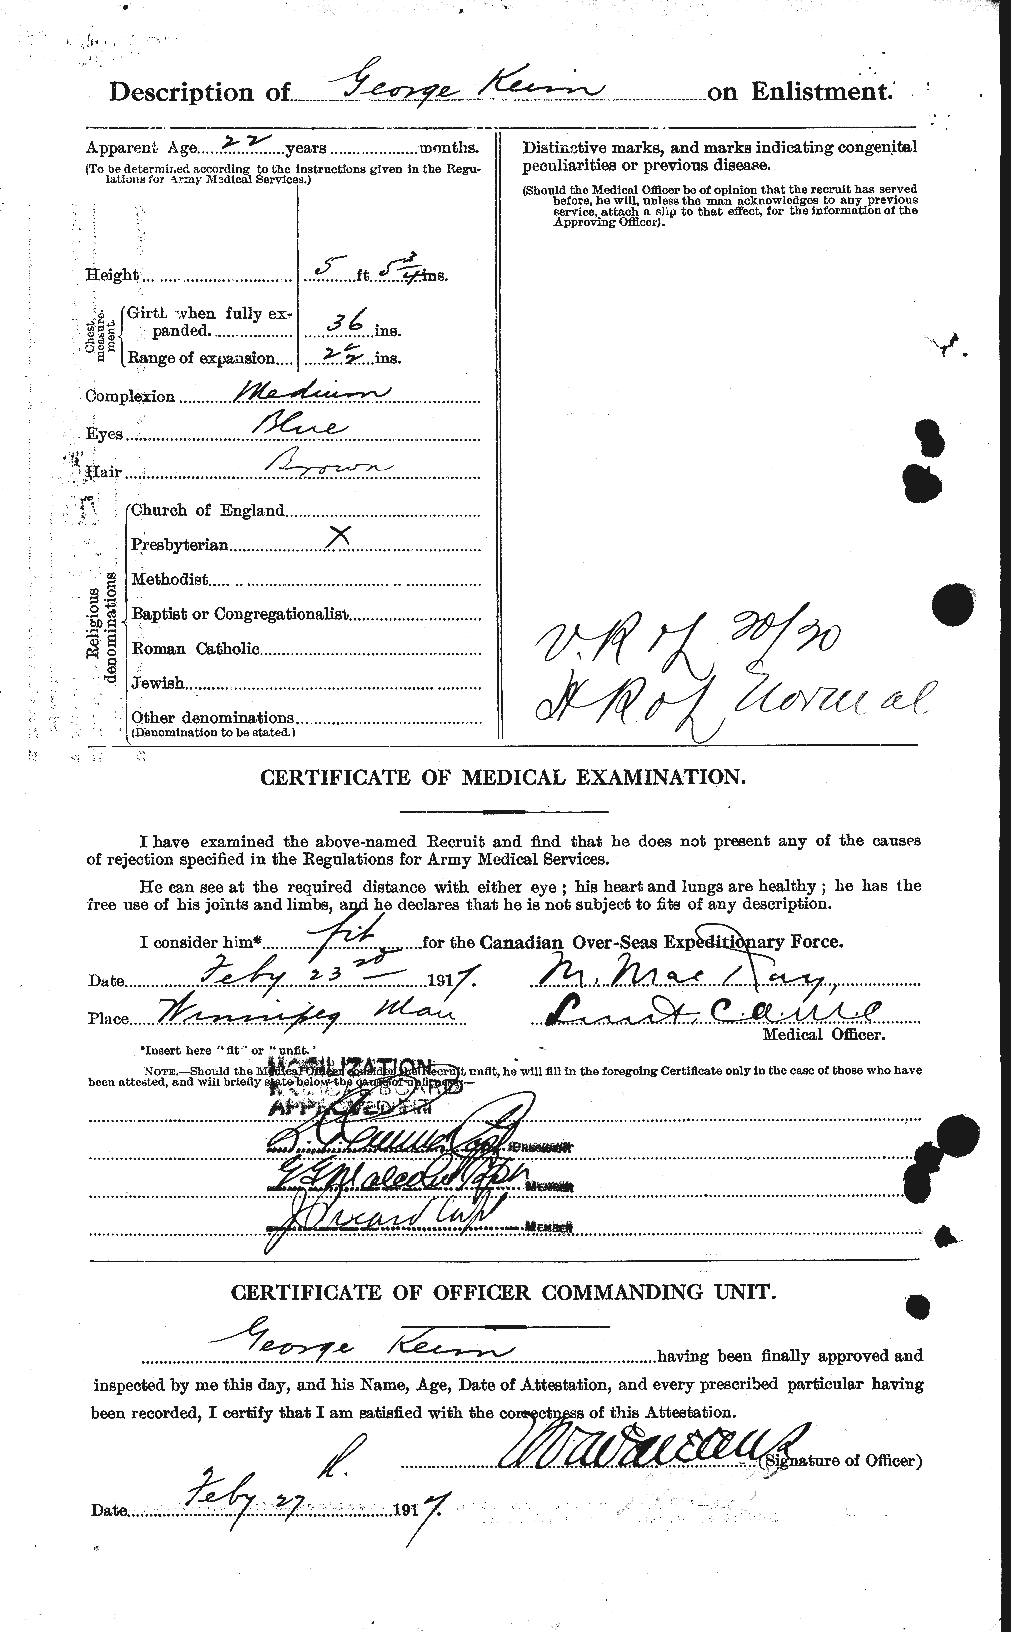 Personnel Records of the First World War - CEF 432317b